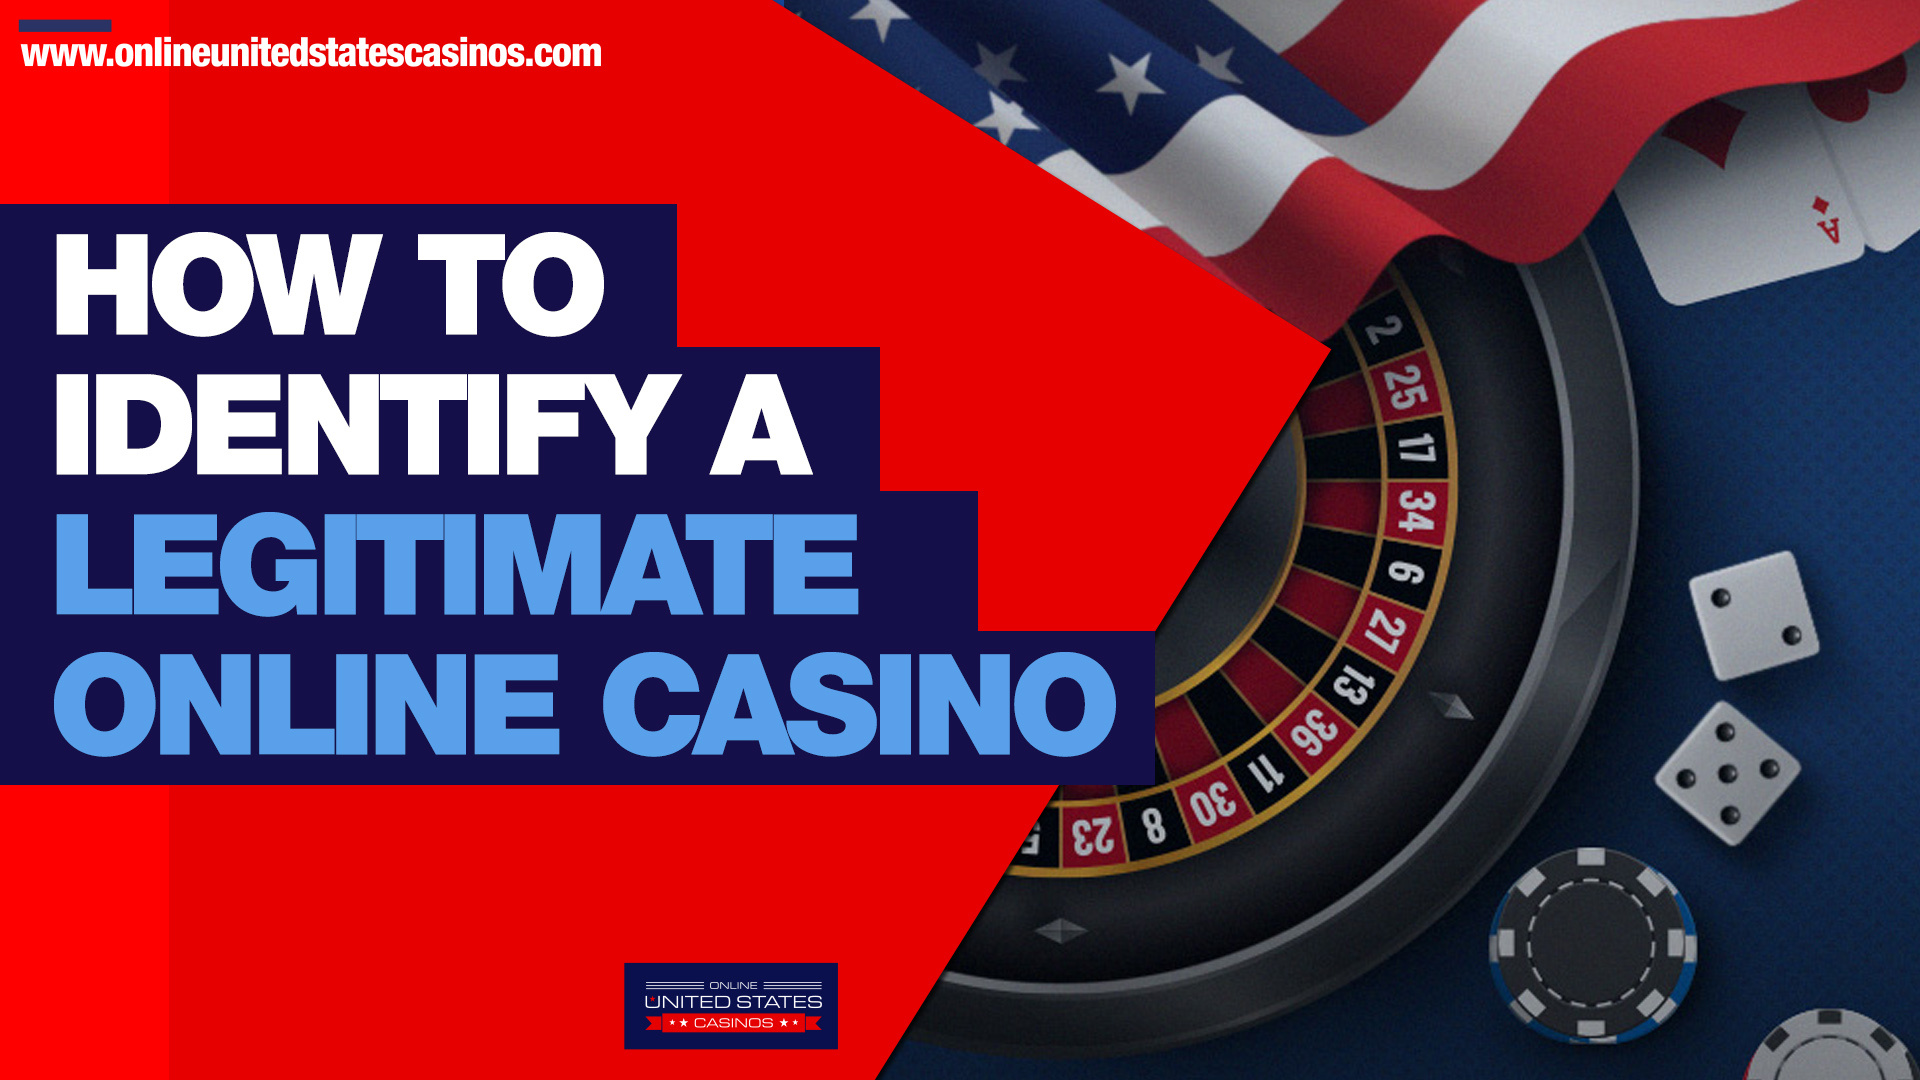 Are there any reputable online casinos slot machines